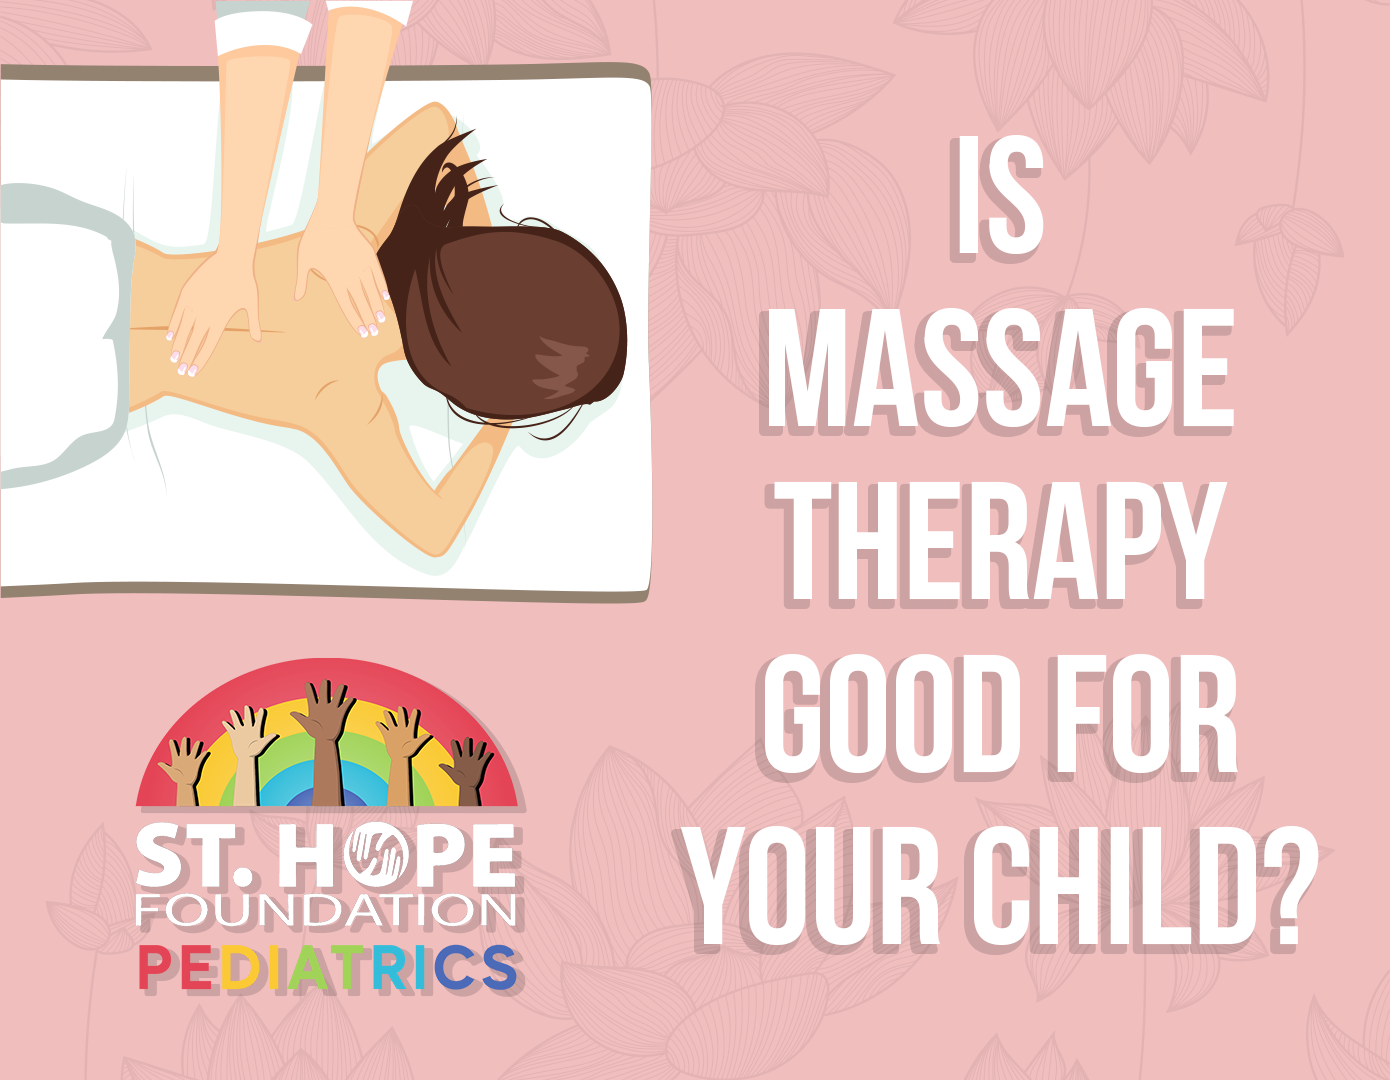 is massage therapy good for kids?